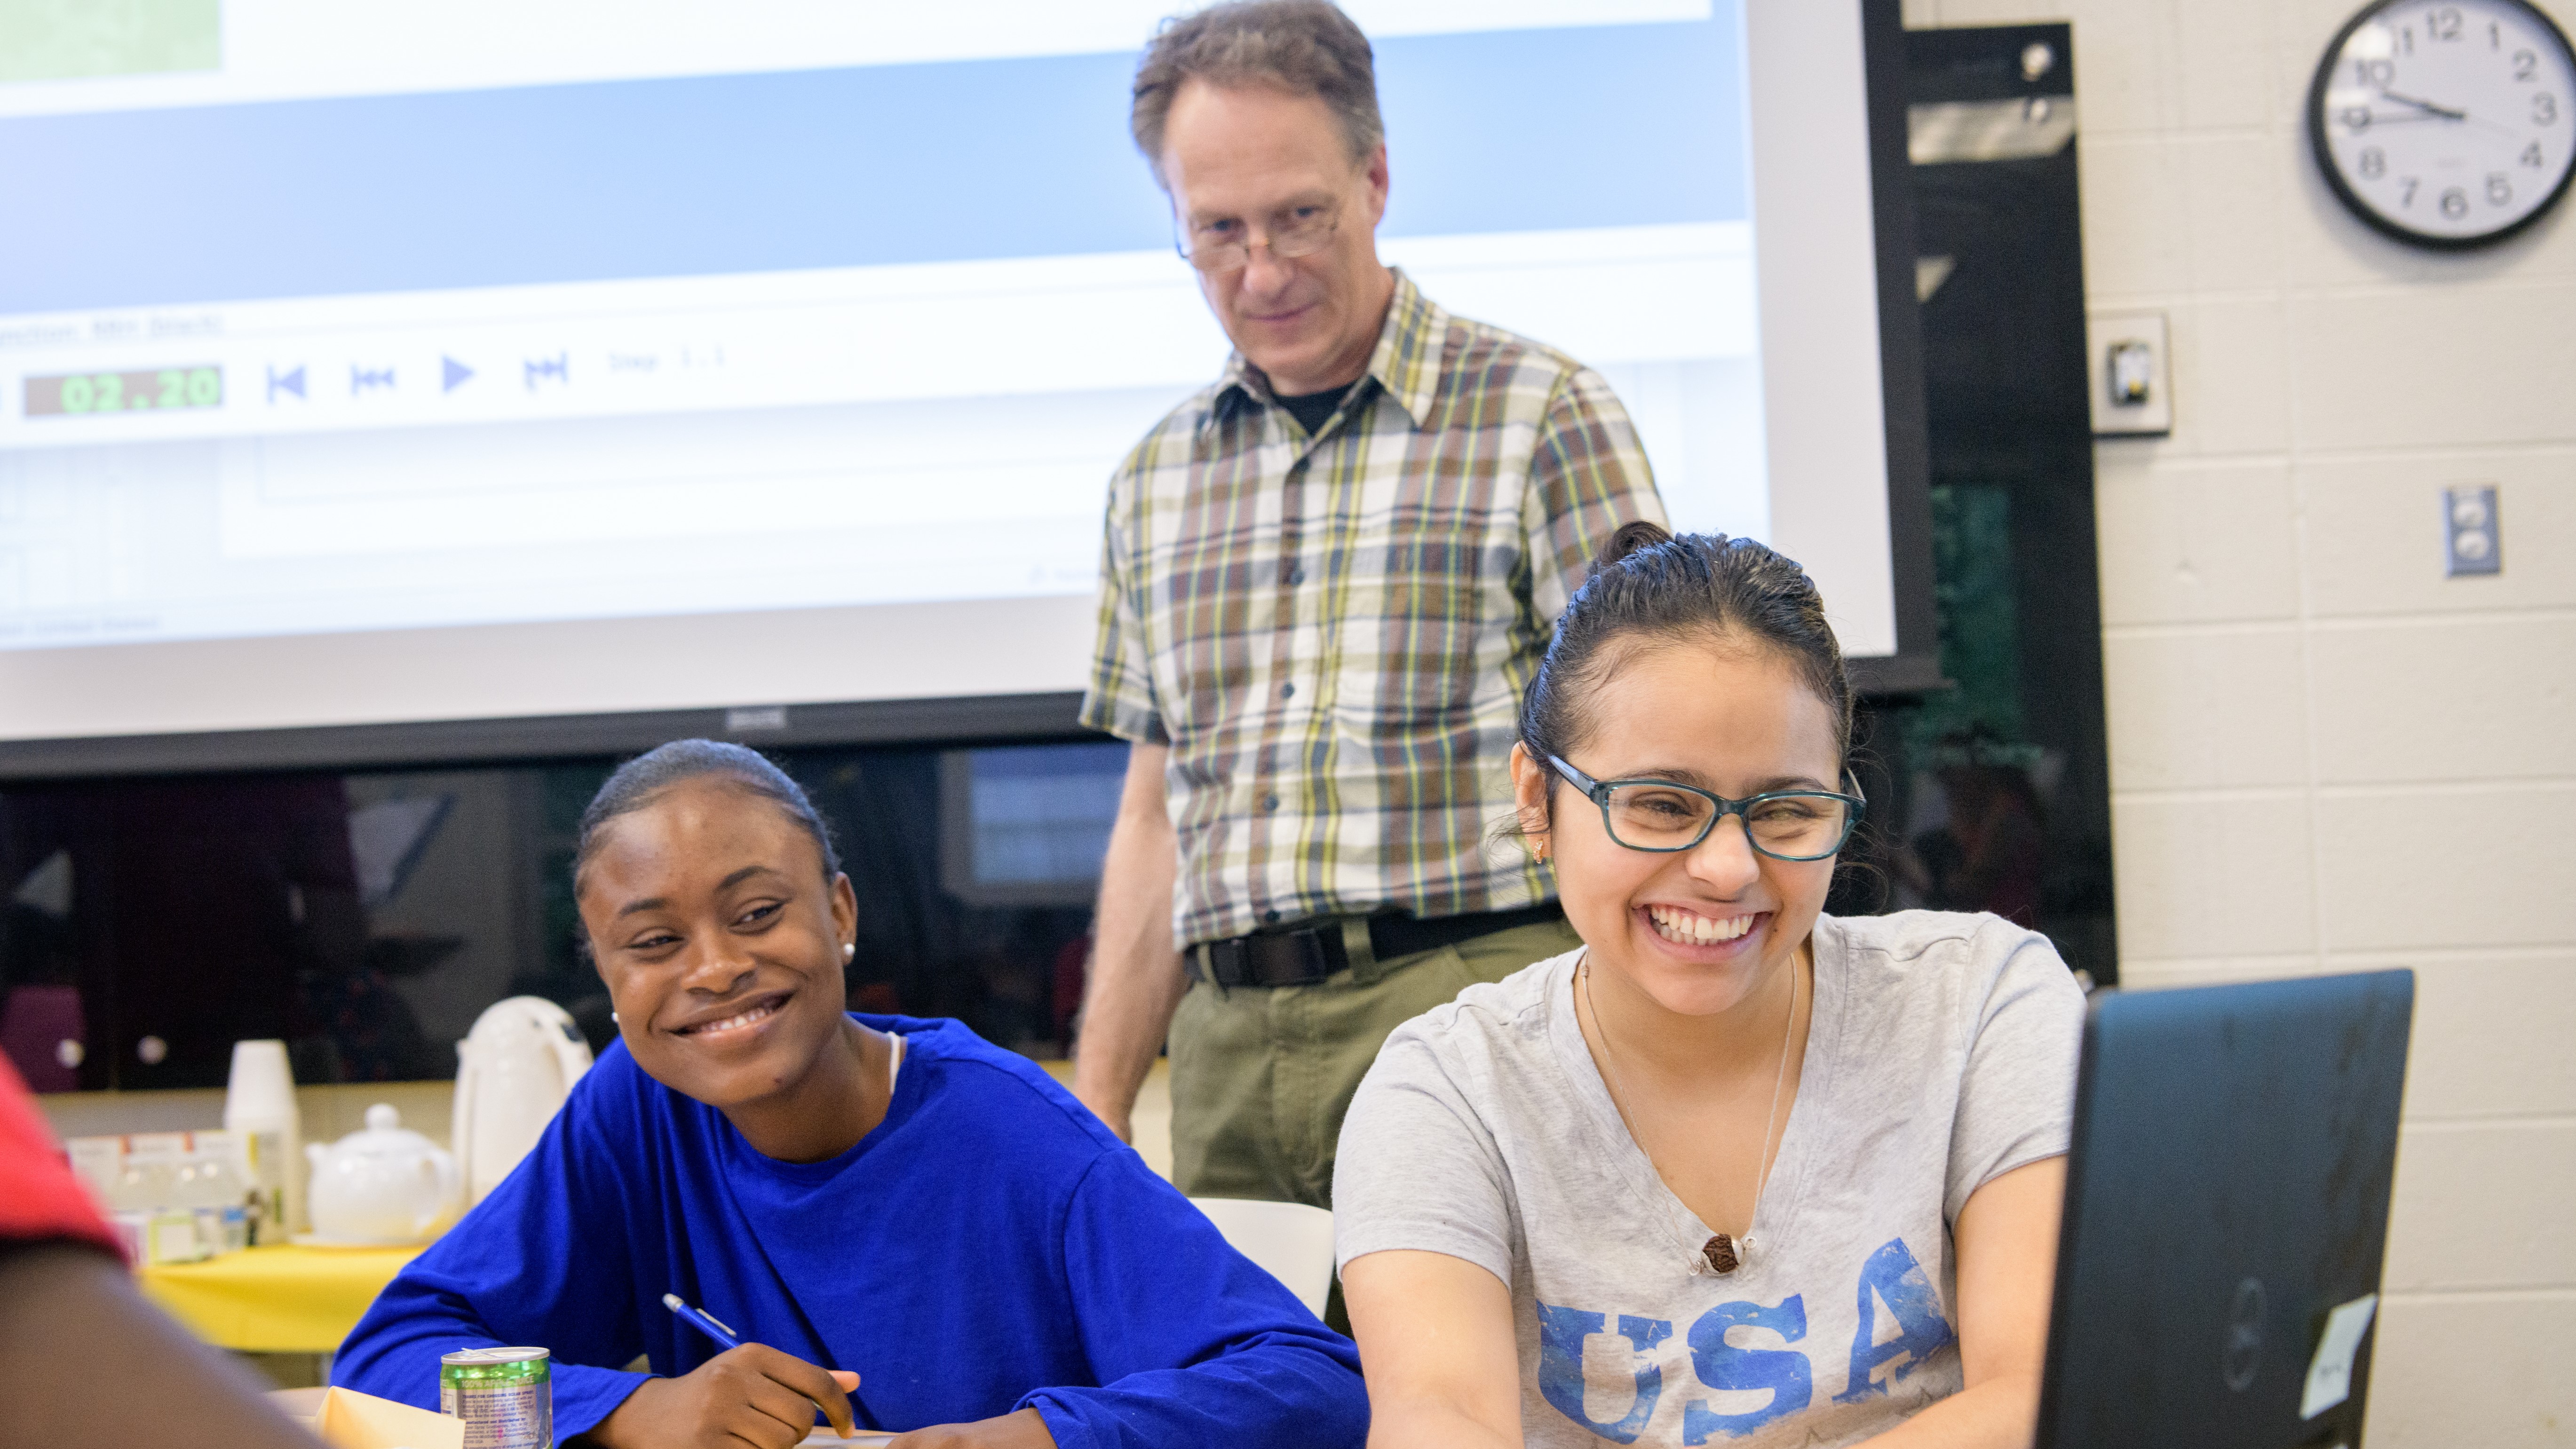 Associate Professor Charles Hohensee, a joint faculty in the School of Education and Mathematics Education Research, is running a summer math program at UD for 15-20 local high school students as part of a $750,000 NSF grant. Photographed for a story in UDaily and to promote his research.